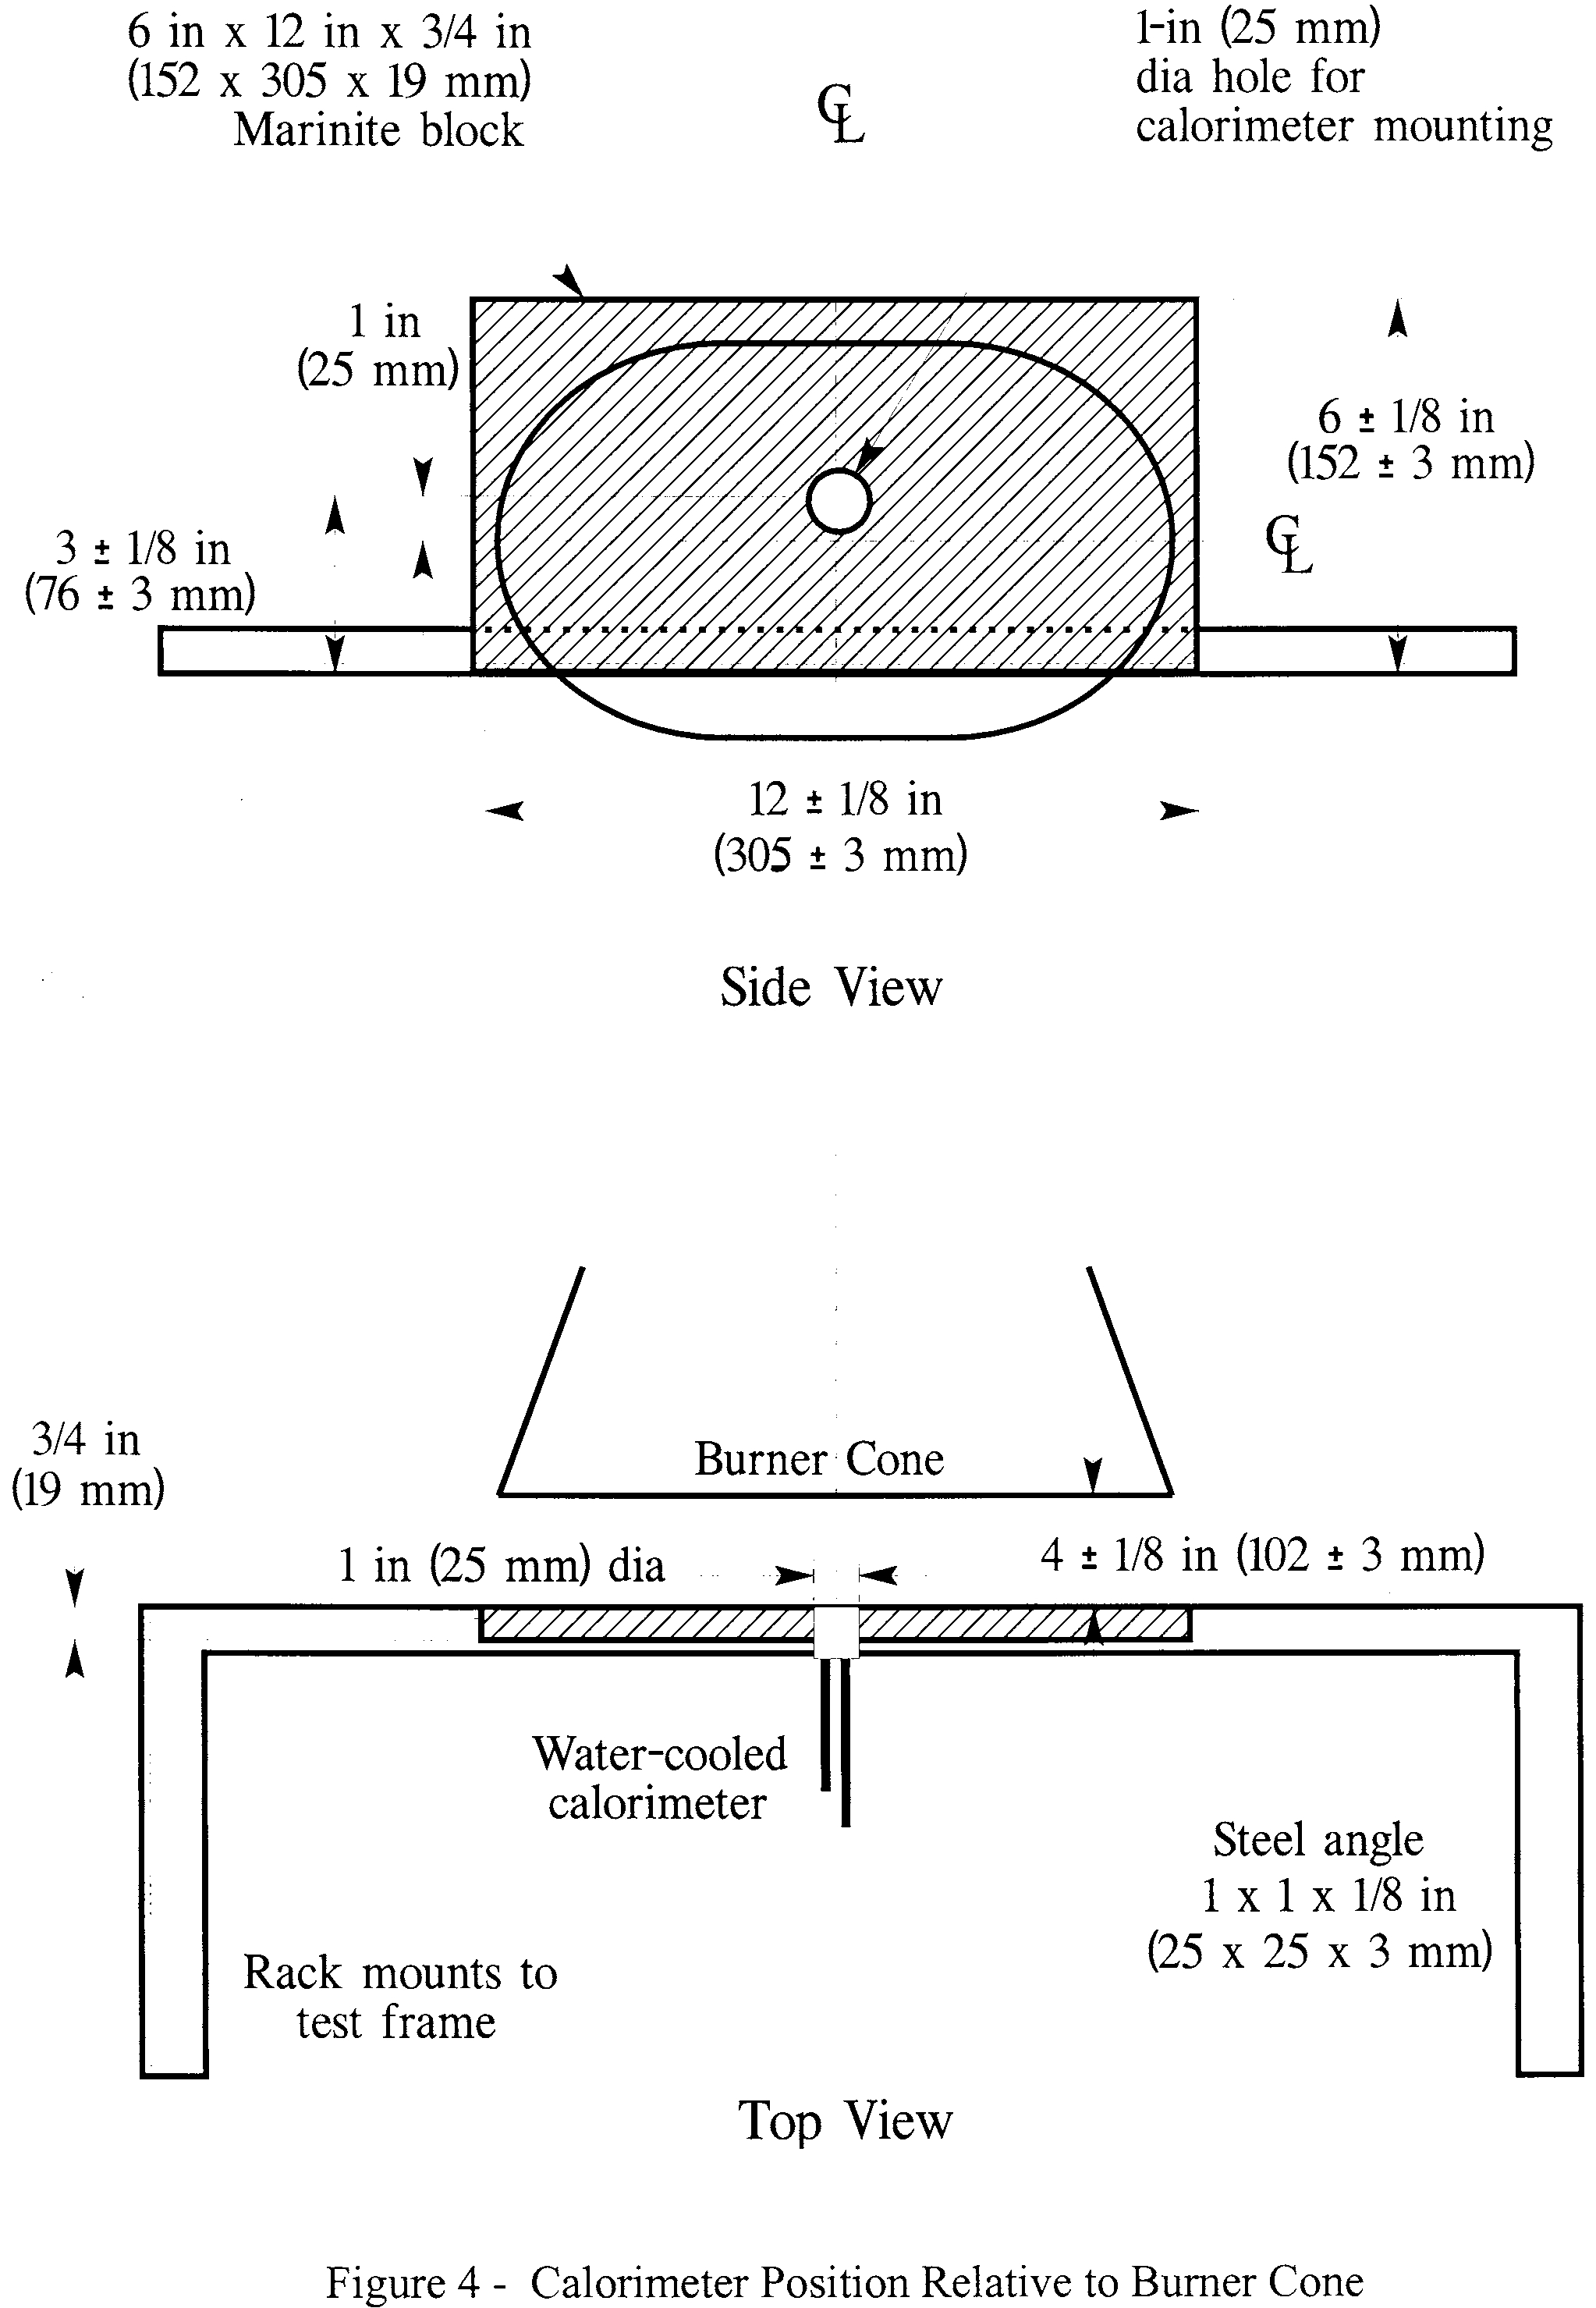 Graphic of (iii) Calorimeter mounting. Mount the calorimeter in a 6- by 12- ±0.125 inch (152- by 305- ±3 mm) by 0.75 ±0.125 inch (19 mm ±3 mm) thick insulating block which is attached to the heat flux calibration rig during calibration (figure 4). Monitor the insulating block for deterioration and replace it when necessary. Adjust the mounting as necessary to ensure that the calorimeter face is parallel to the exit plane of the test burner cone.